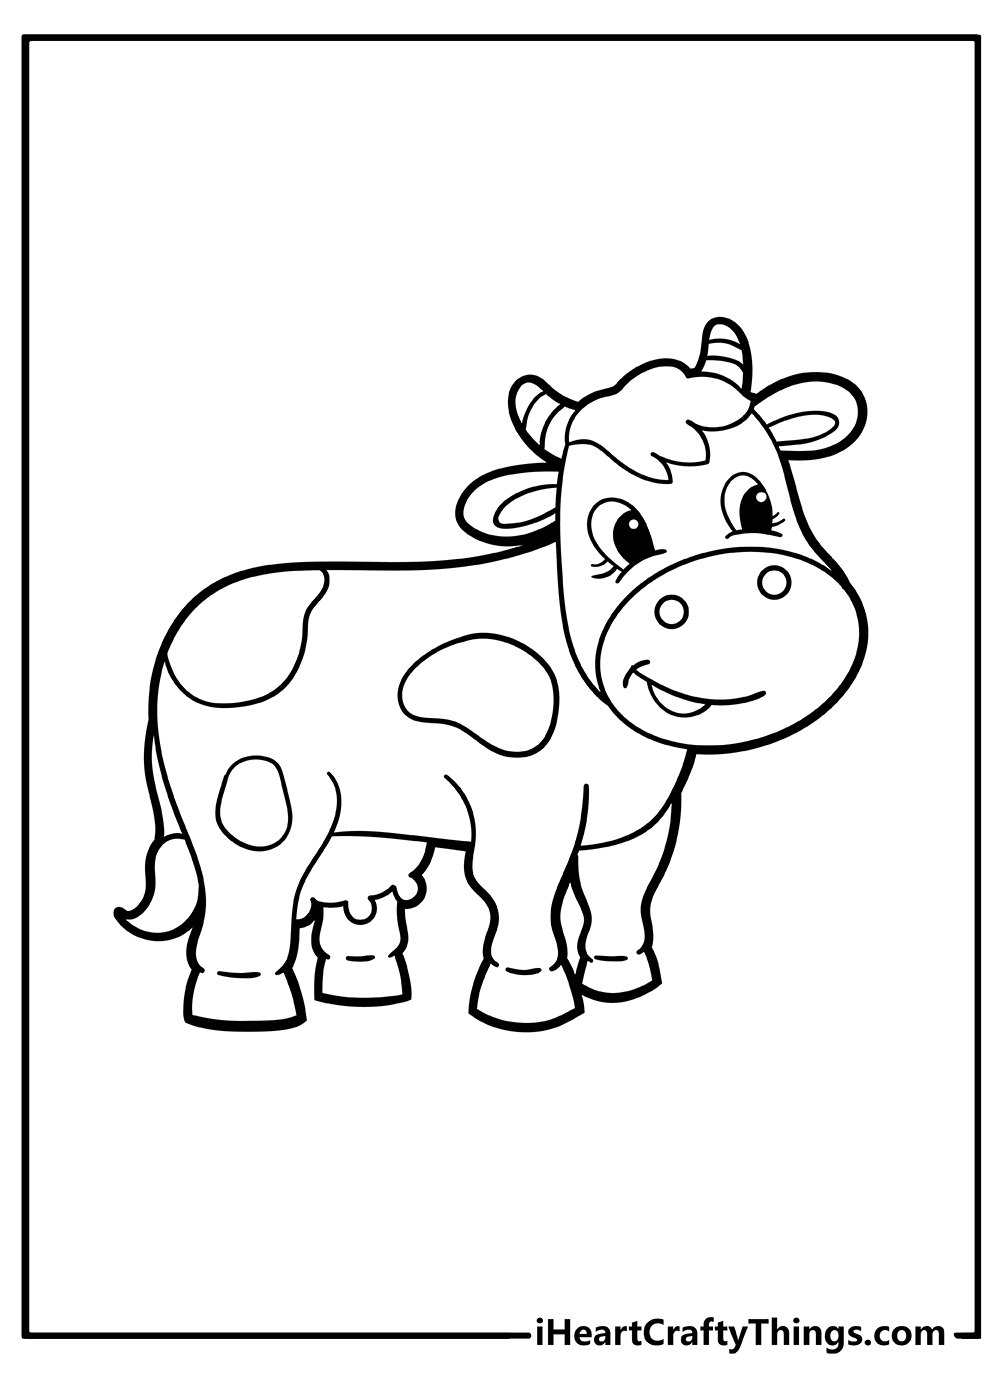 Cow coloring pages free printables